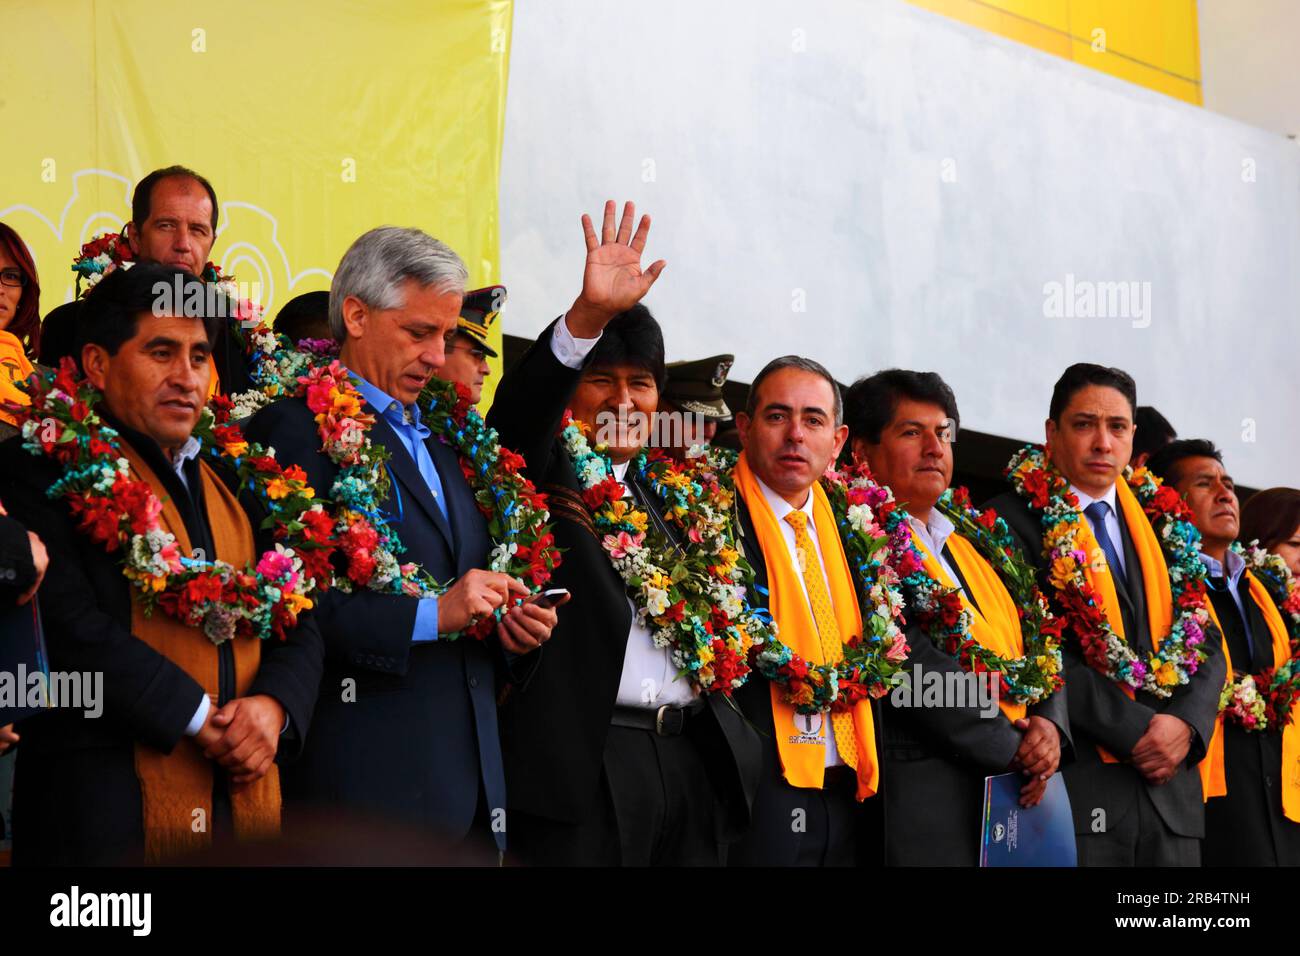 El Alto, Bolivia, 15th September 2014. Bolivian president Evo Morales (centre) waves to supporters during the inauguration ceremony of the cable car Yellow Line. Centre left is the vice president Alvaro Garcia Linera, far left the La Paz Department Governor Cesar Cocarico. The Yellow Line is the second of three cable car lines to be opened this year, and is part of an ambitious project to relieve traffic congestion. The first line opened in May, when all three are open they will be the world's longest urban cable car system. Stock Photo